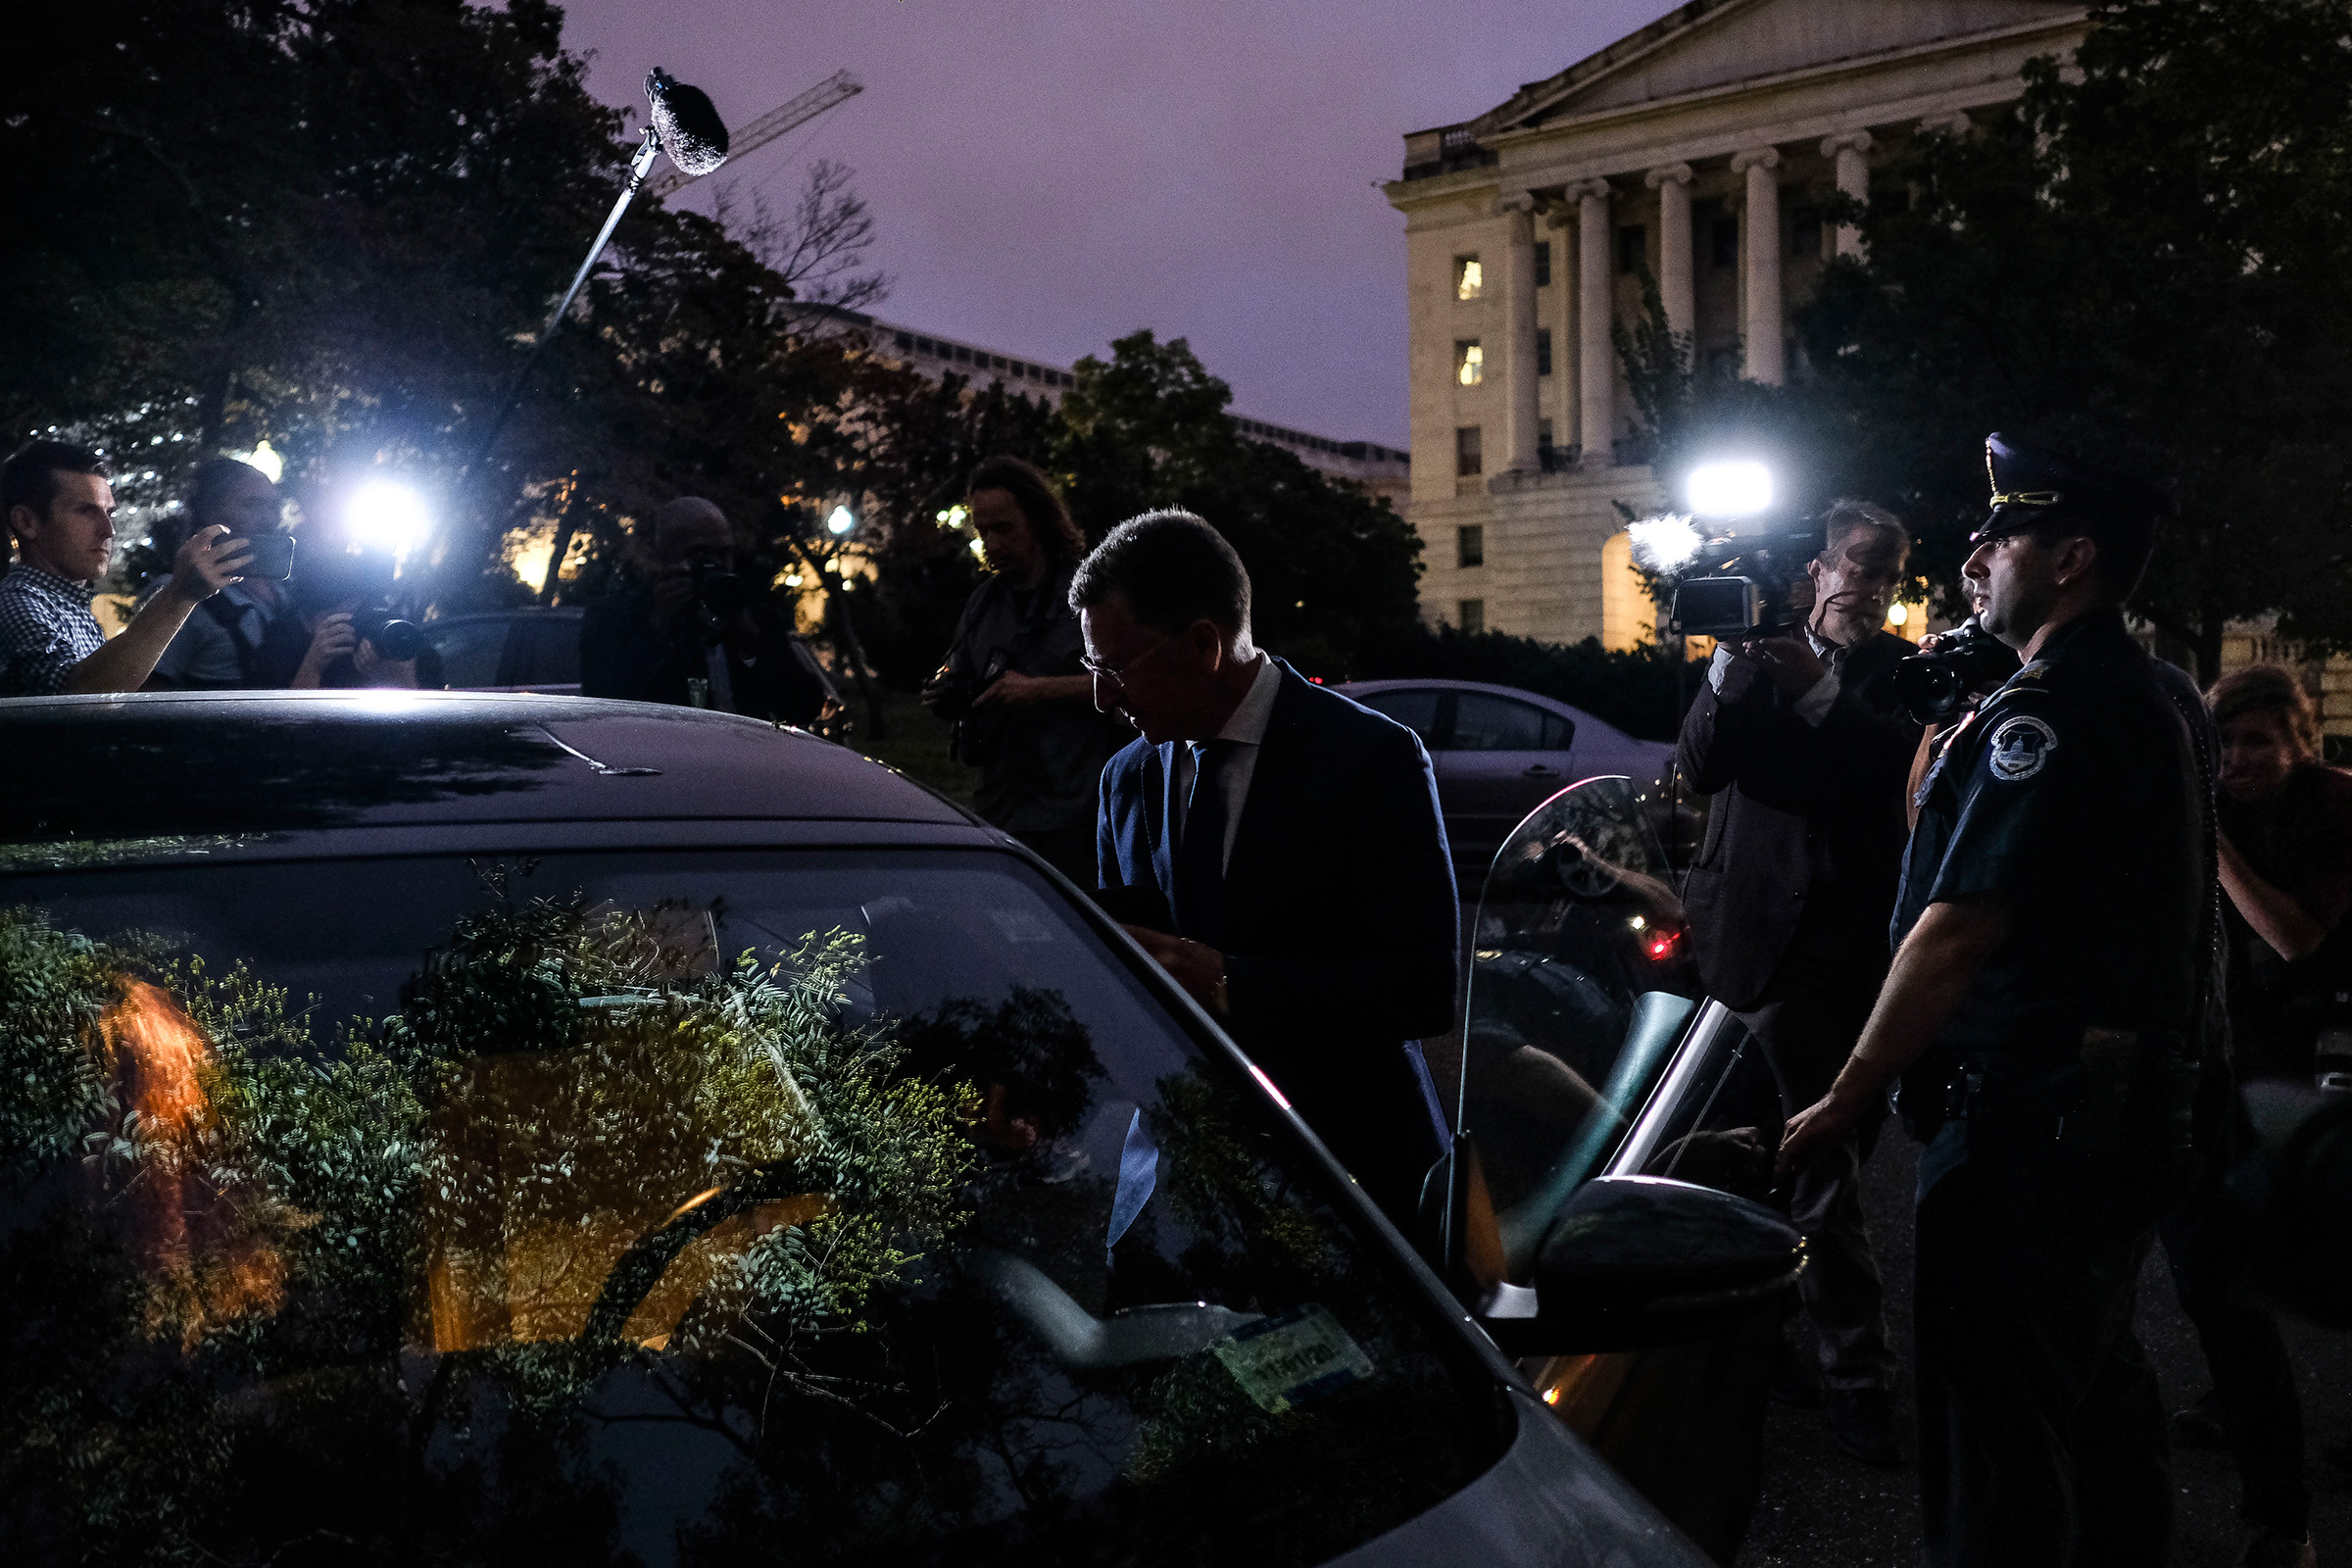 Kurt Volker, former U.S. envoy to Ukraine, leaves the Capitol after delivering hours of testimony to the House intelligence committees in Washington, D.C., on Oct. 3, 2019. (Gabriella Demczuk for TIME)